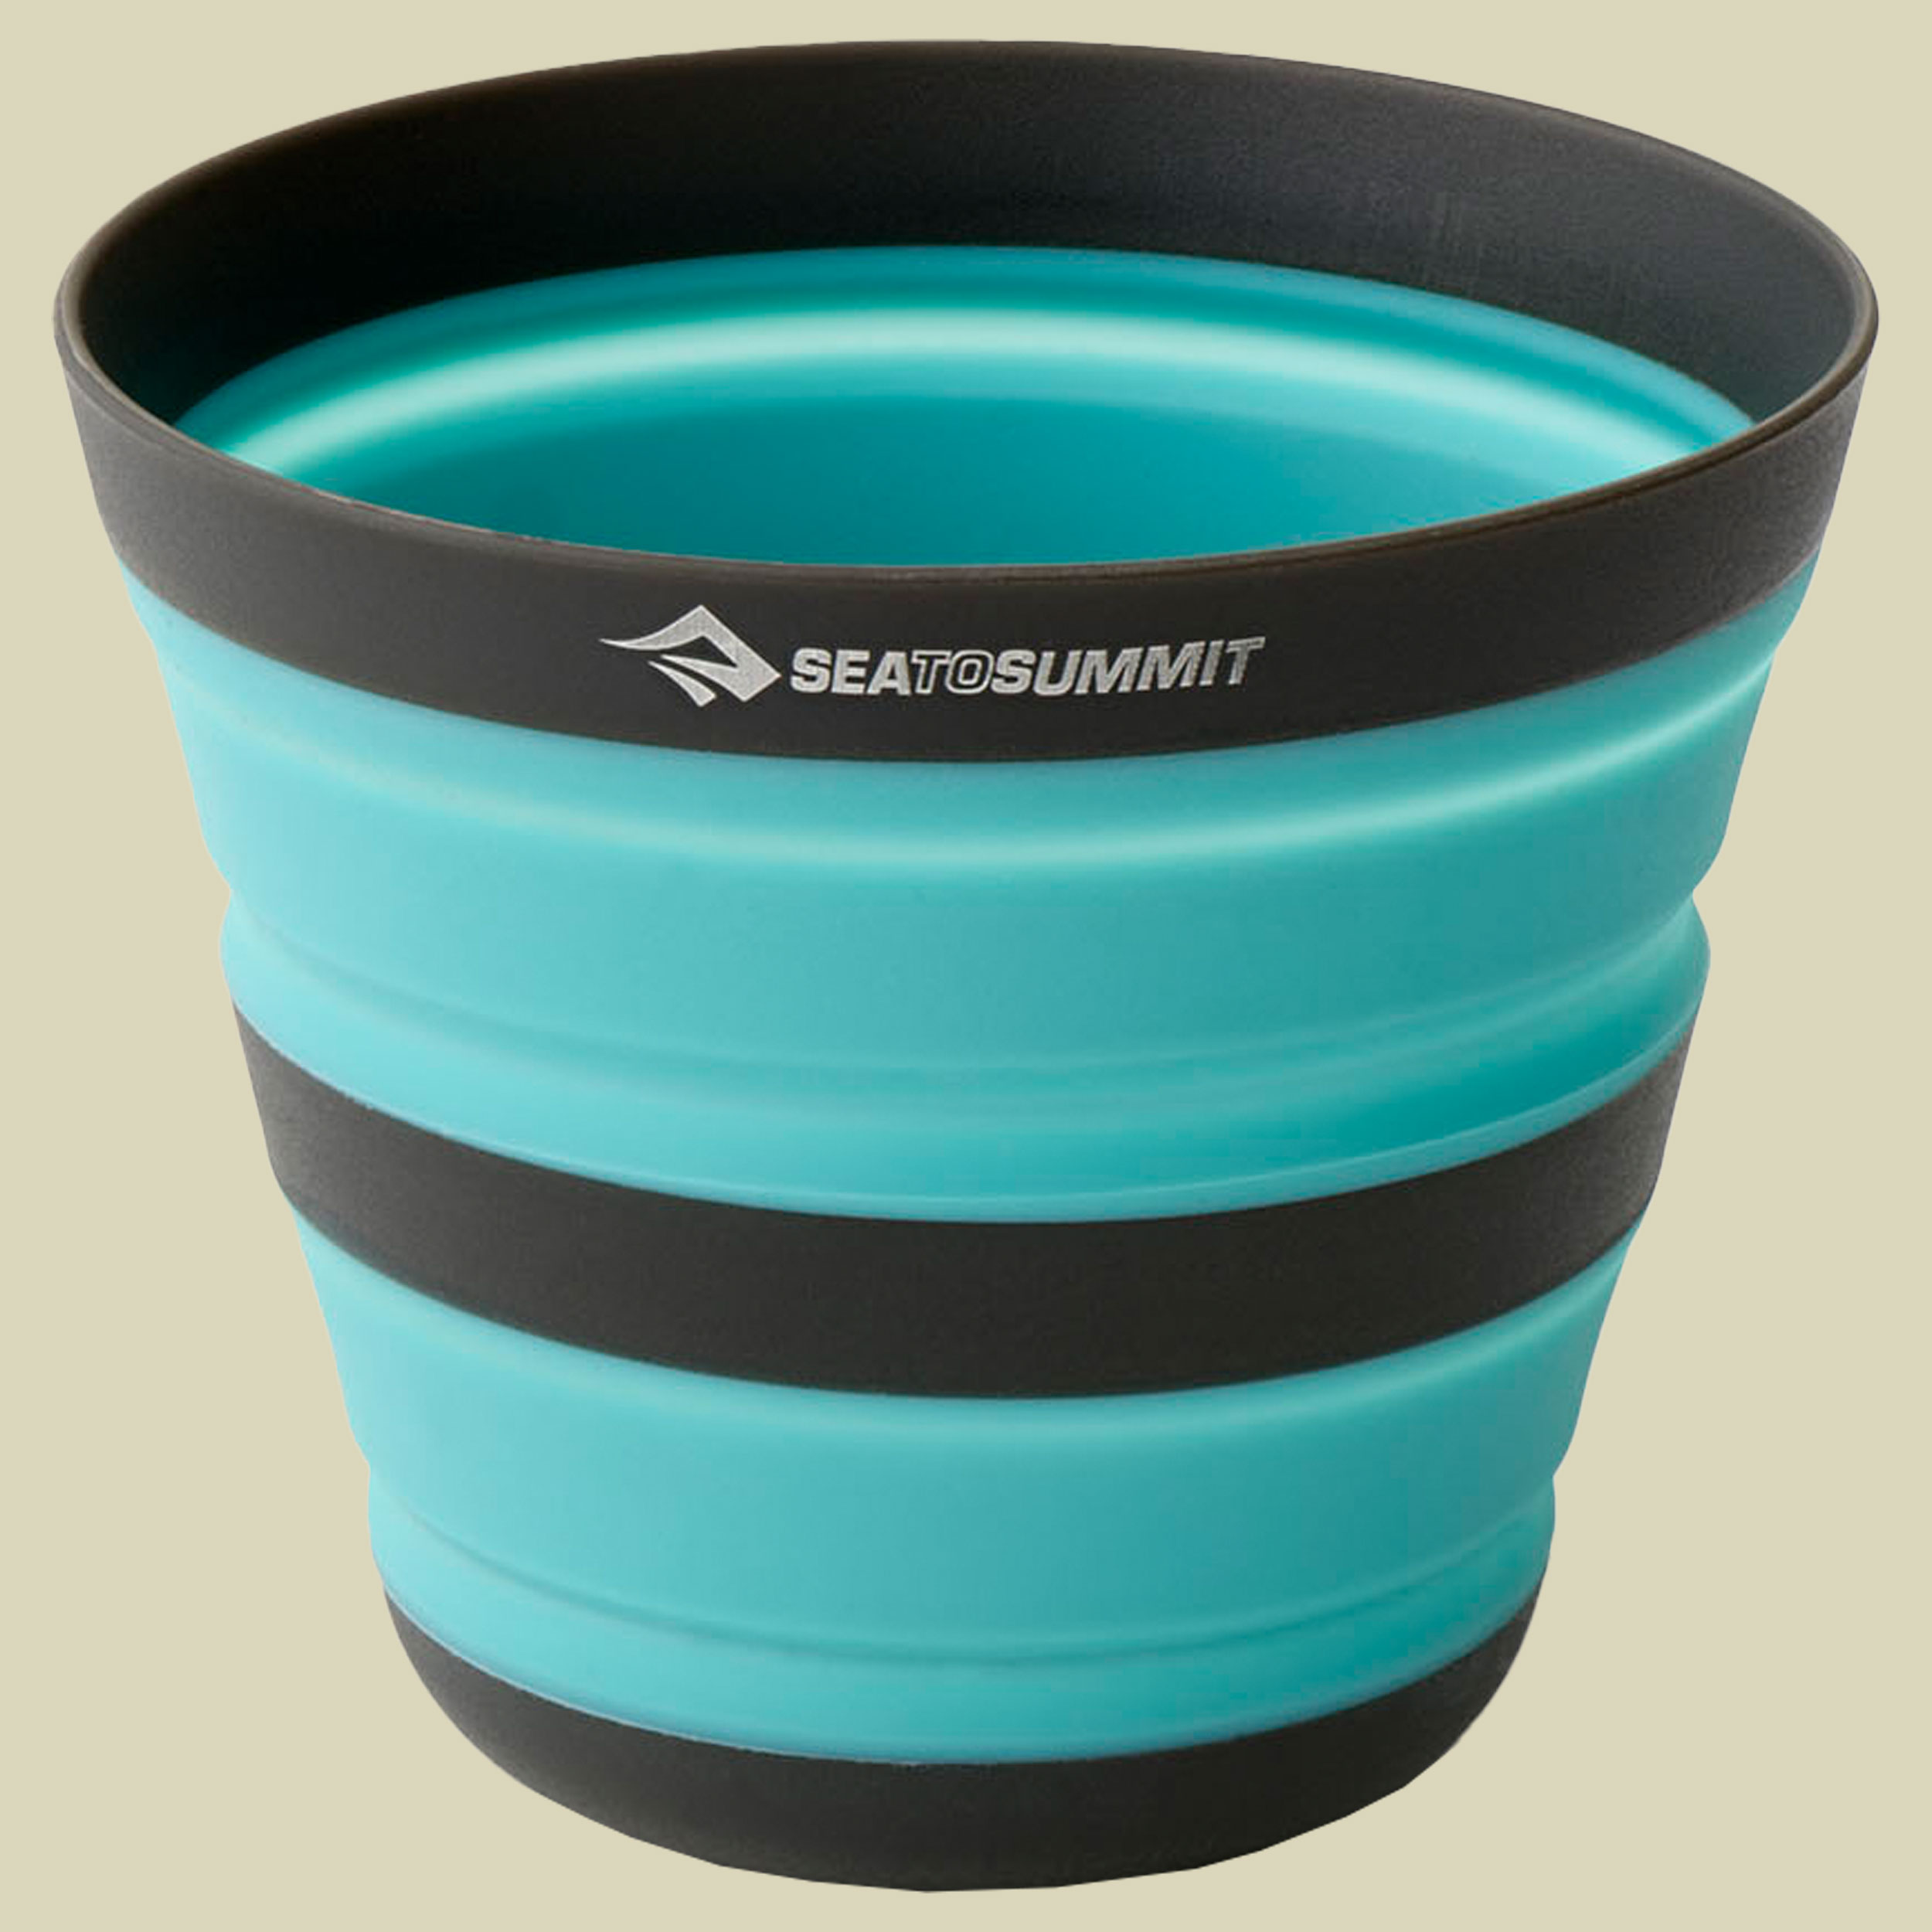 Frontier UL Collapsible Cup one size blau - aqua sea blue